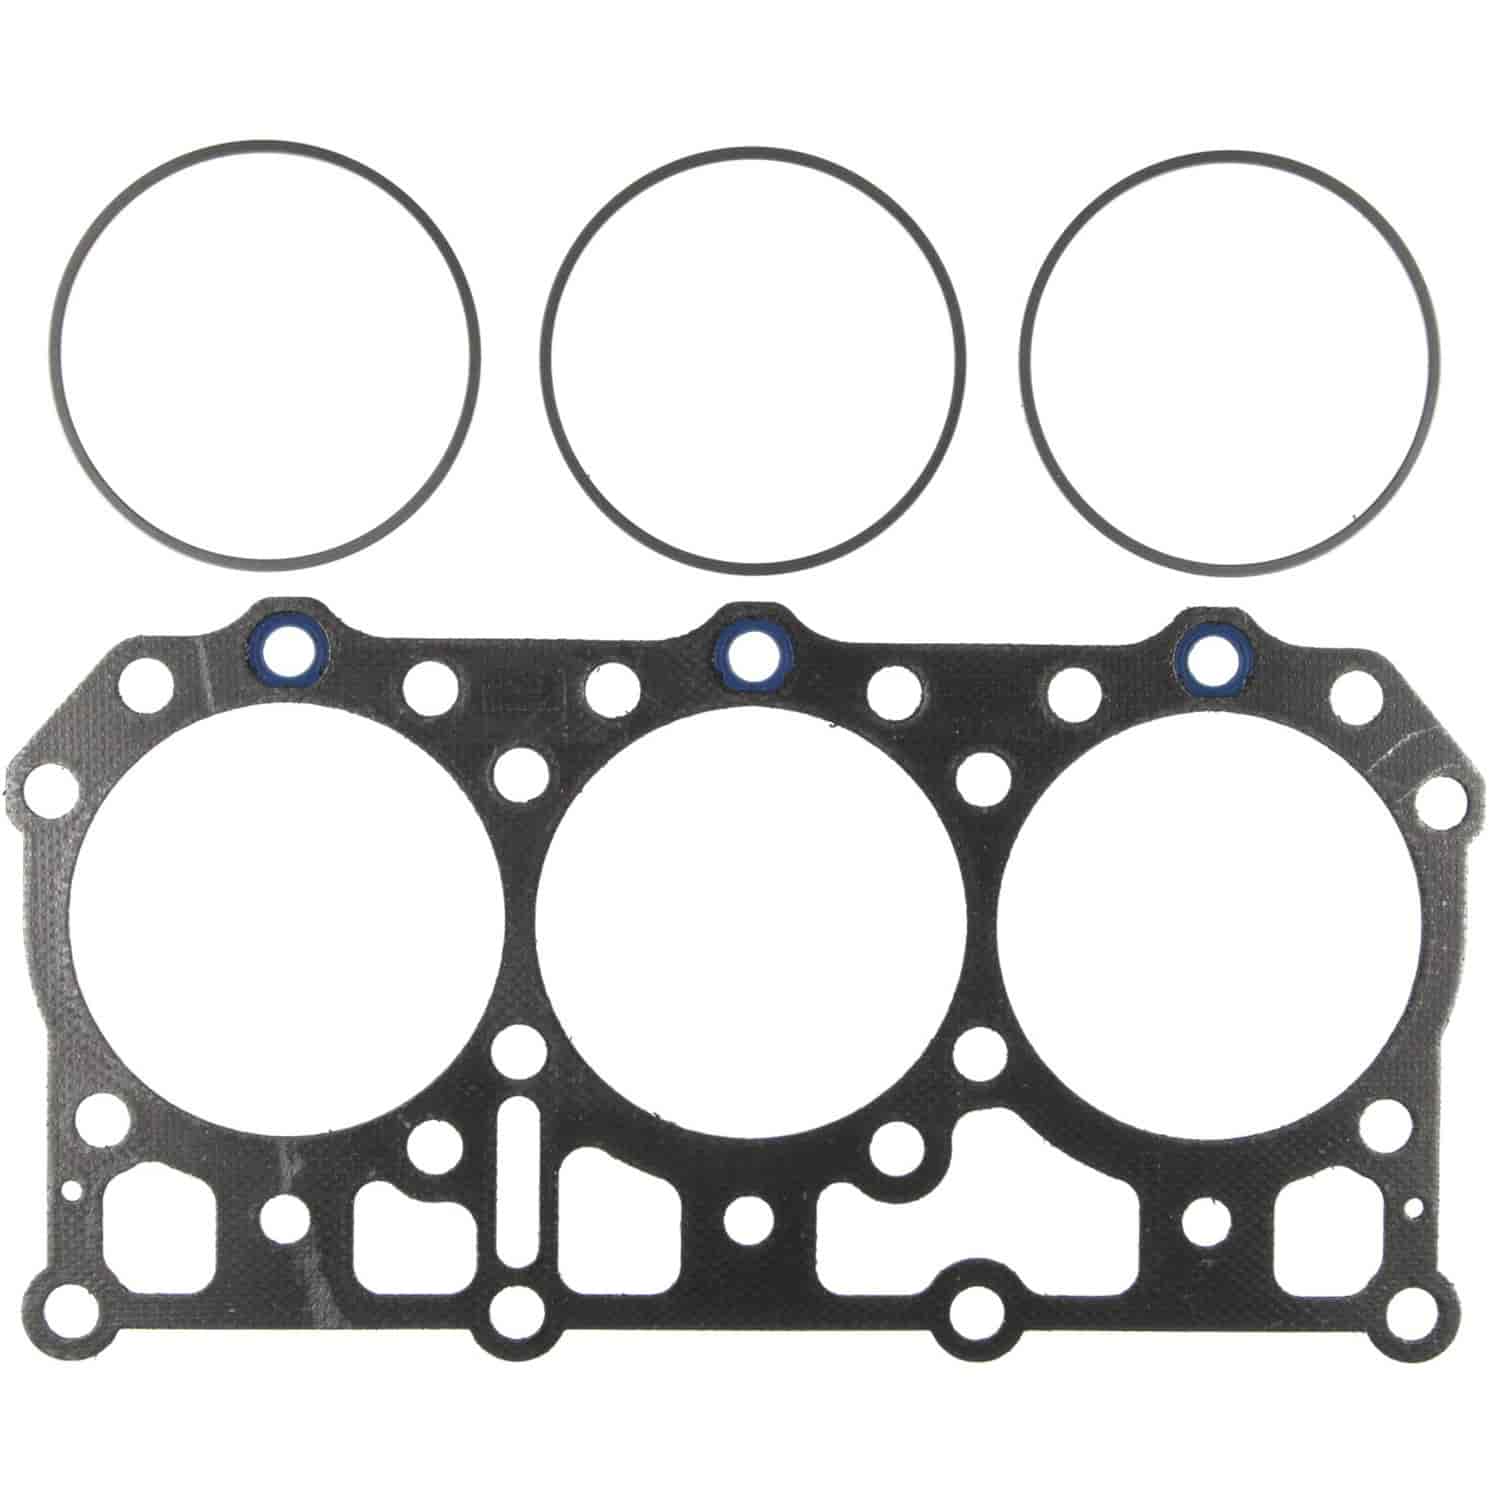 Cylinder Head Set Mack E7 Trk. Eng. S/N 3L1-up Years 6/93-up Flat Fire Ring